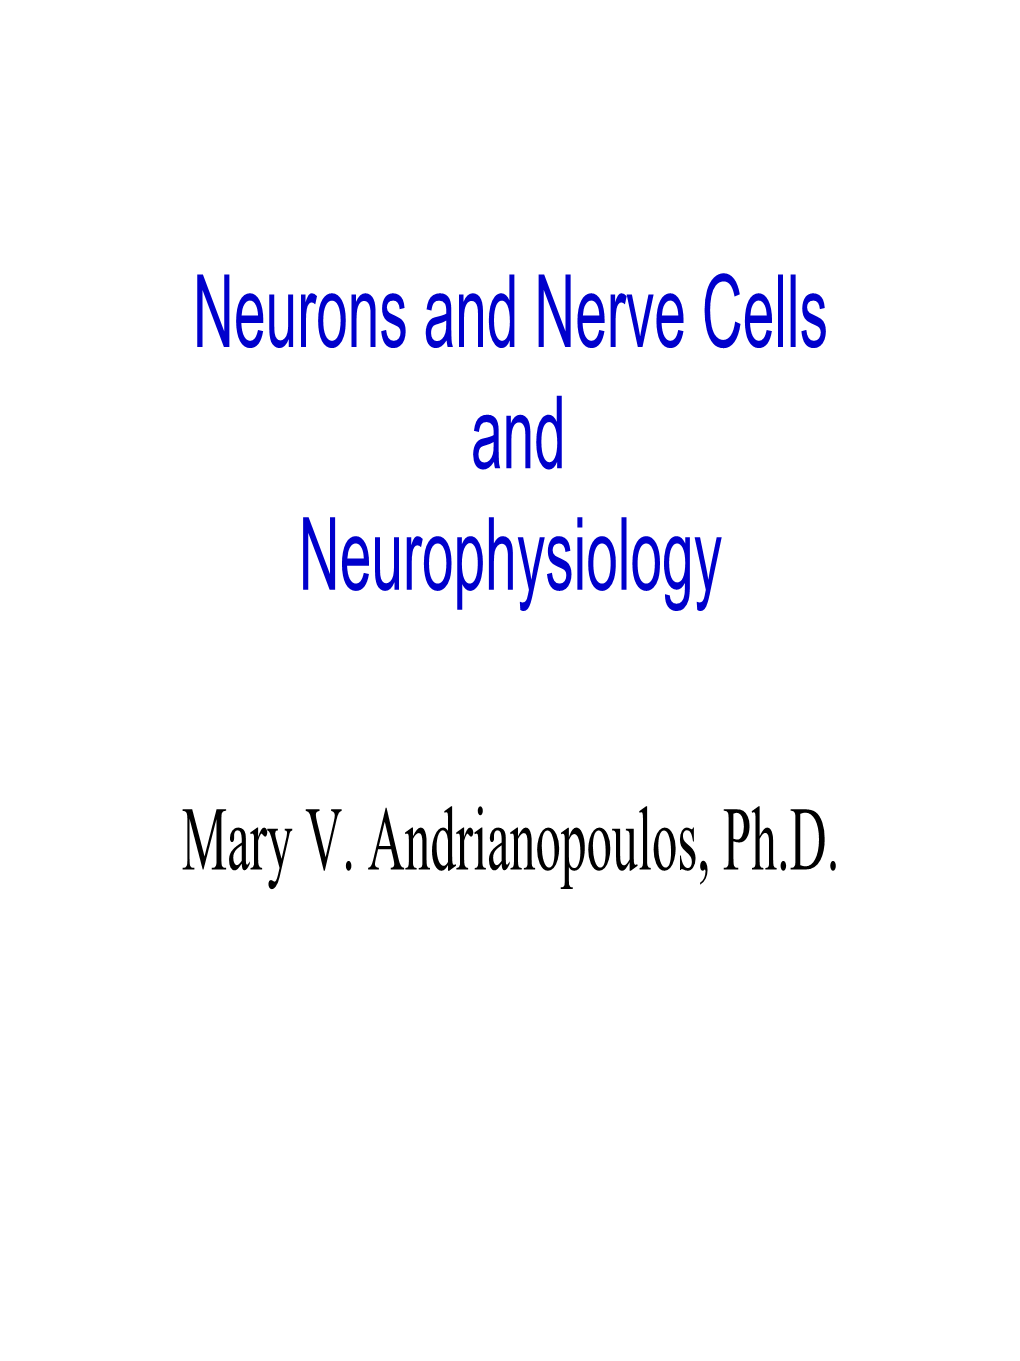 Nerve Cells and Neurophysiology